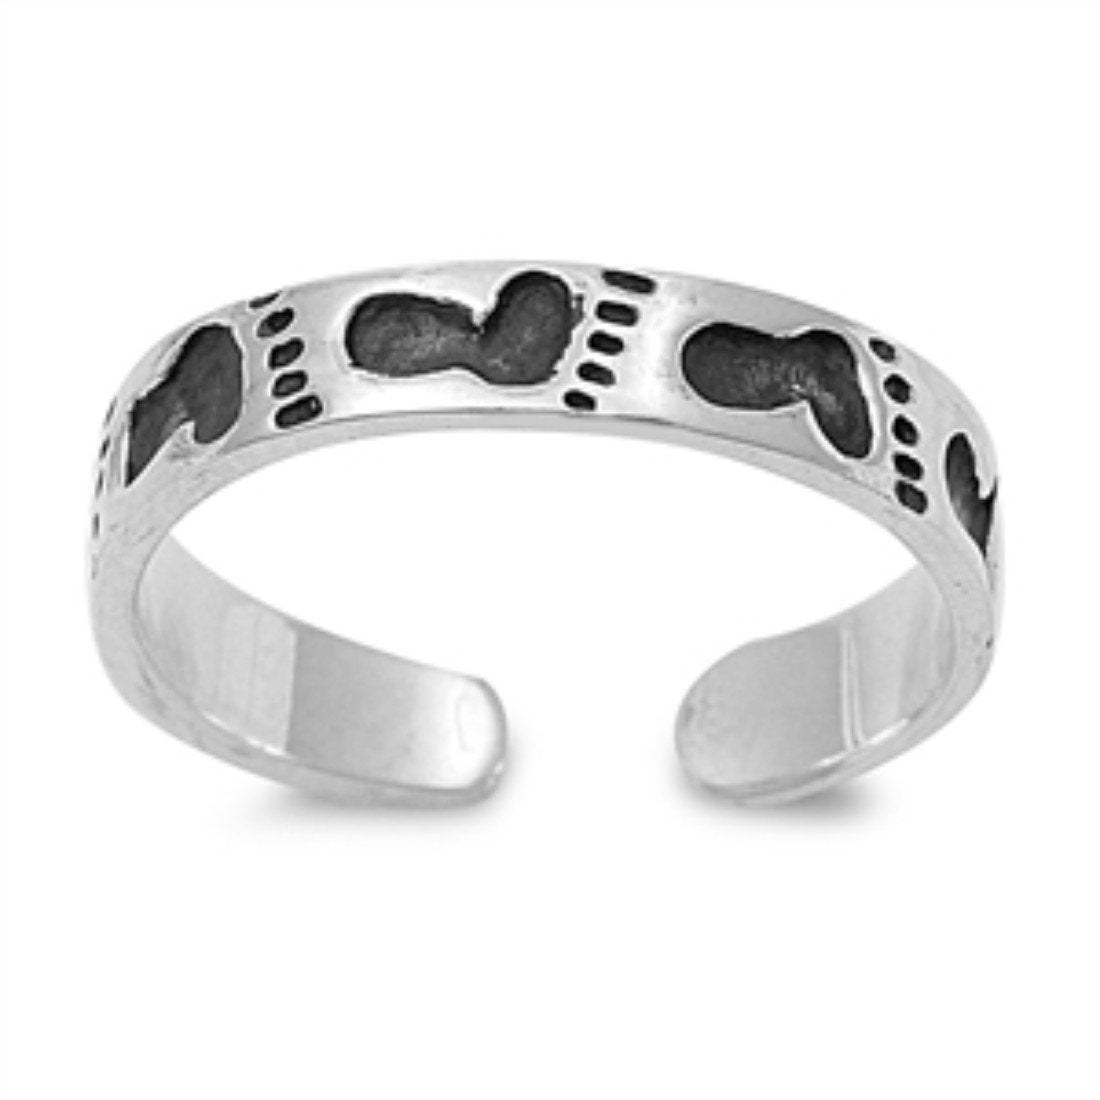 Adjustable Plain Silver Toe Ring Band 925 Sterling Silver (4mm)